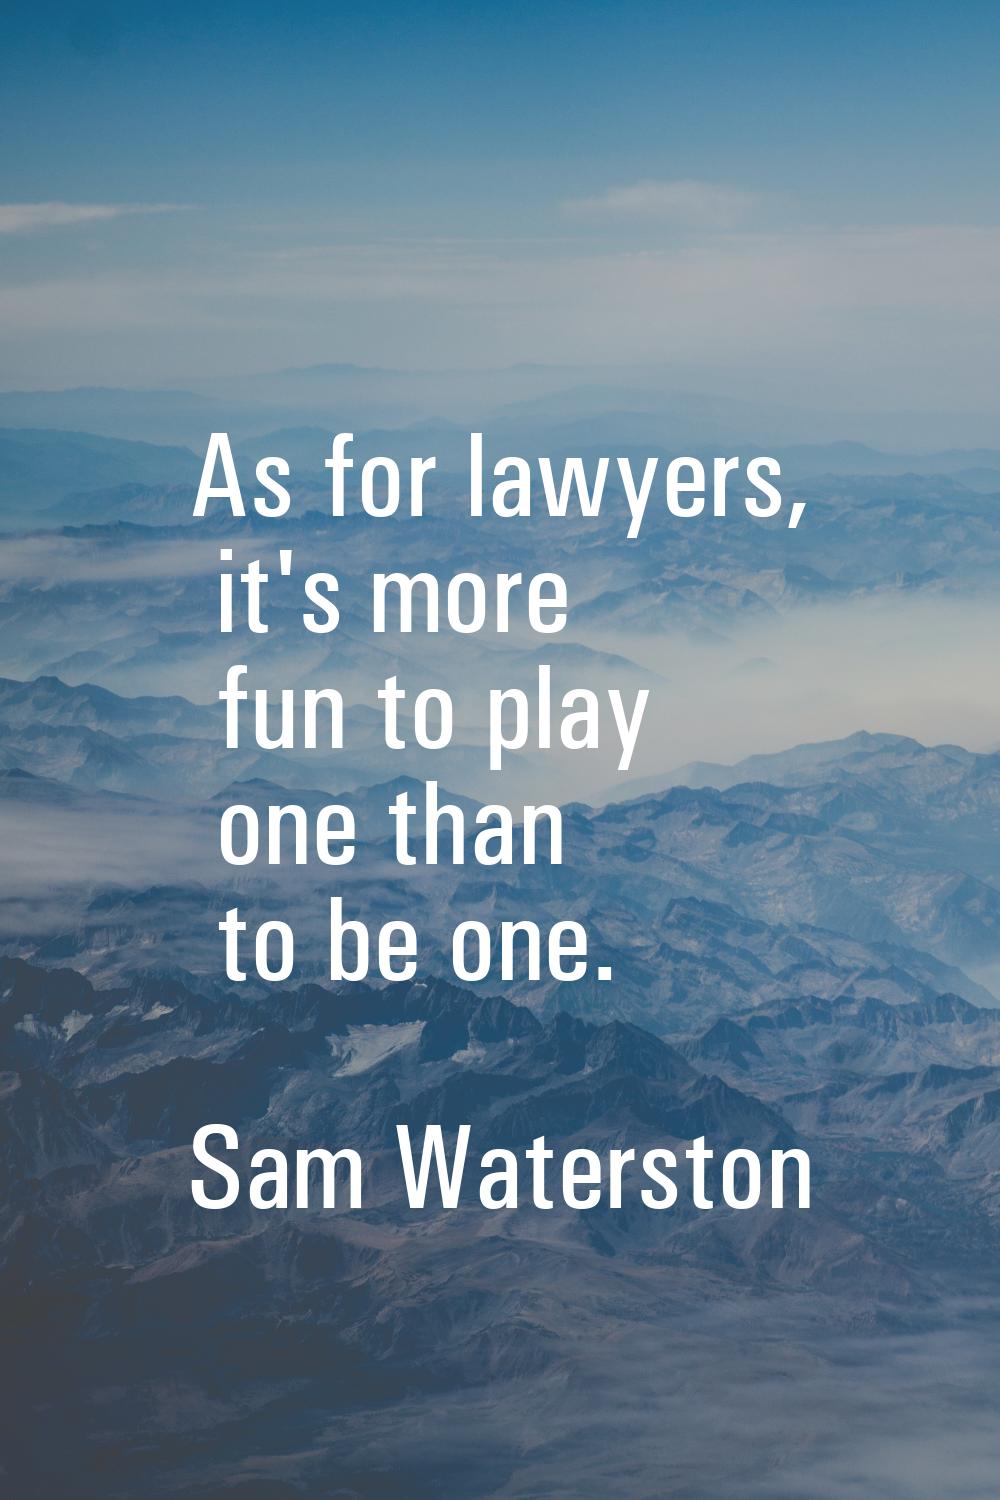 As for lawyers, it's more fun to play one than to be one.